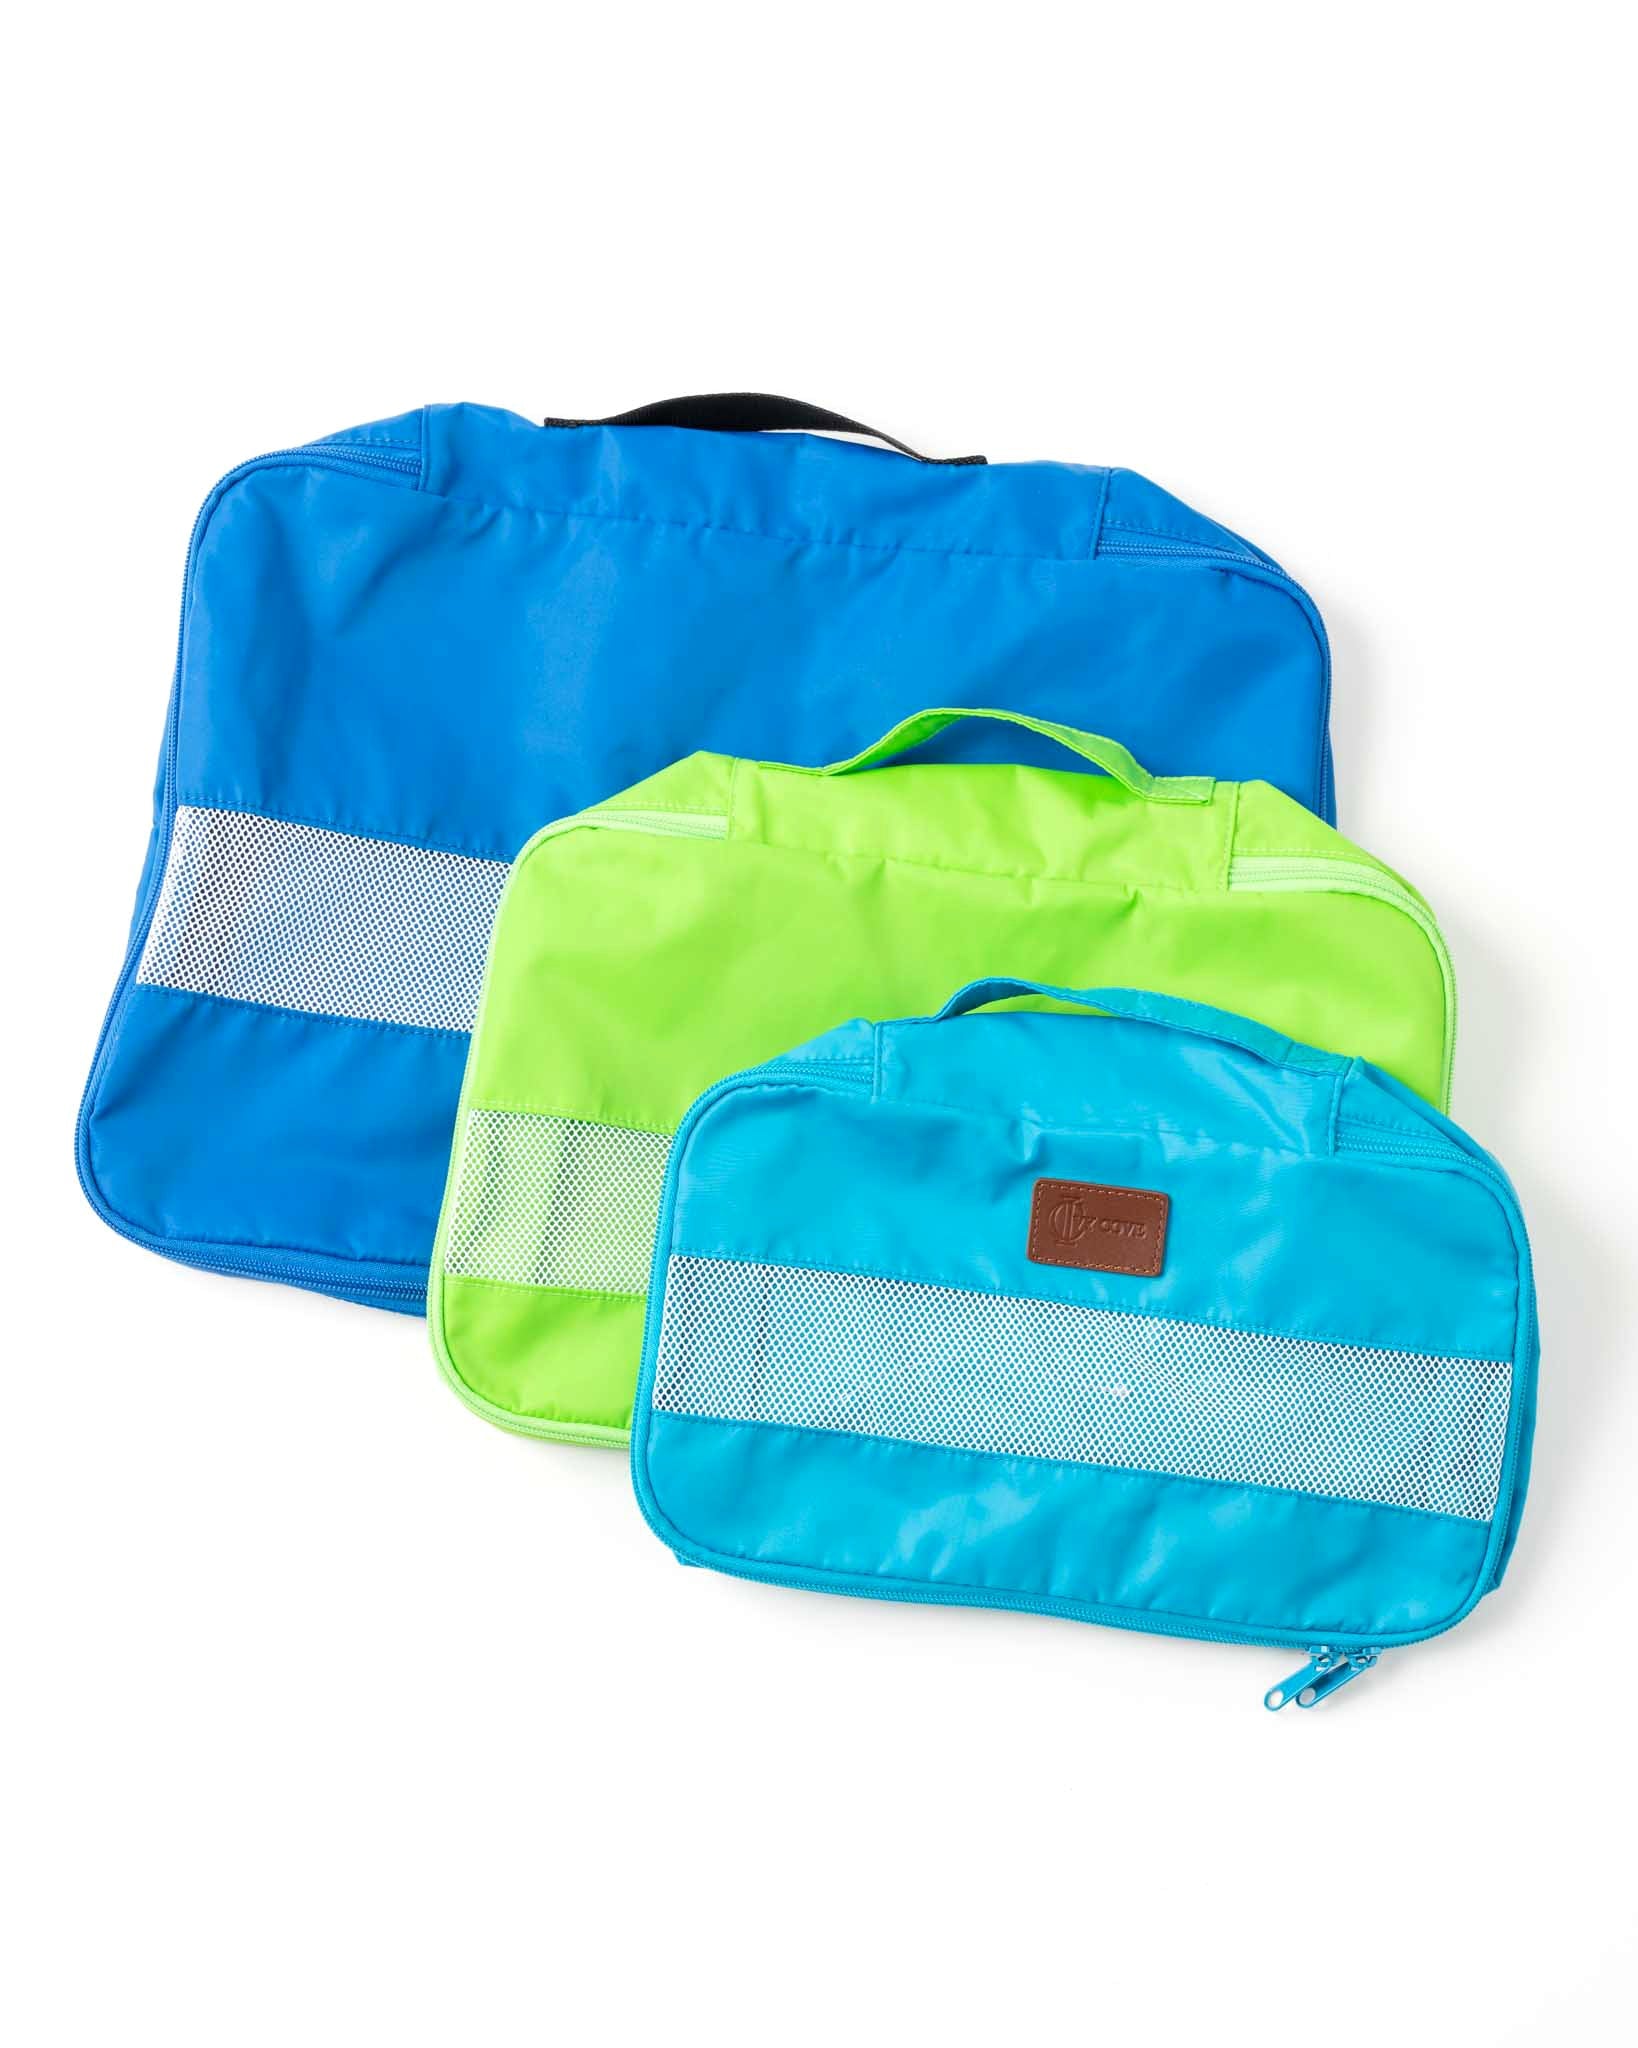 Freshwater Packing Cubes - Ivy Cove Montecito